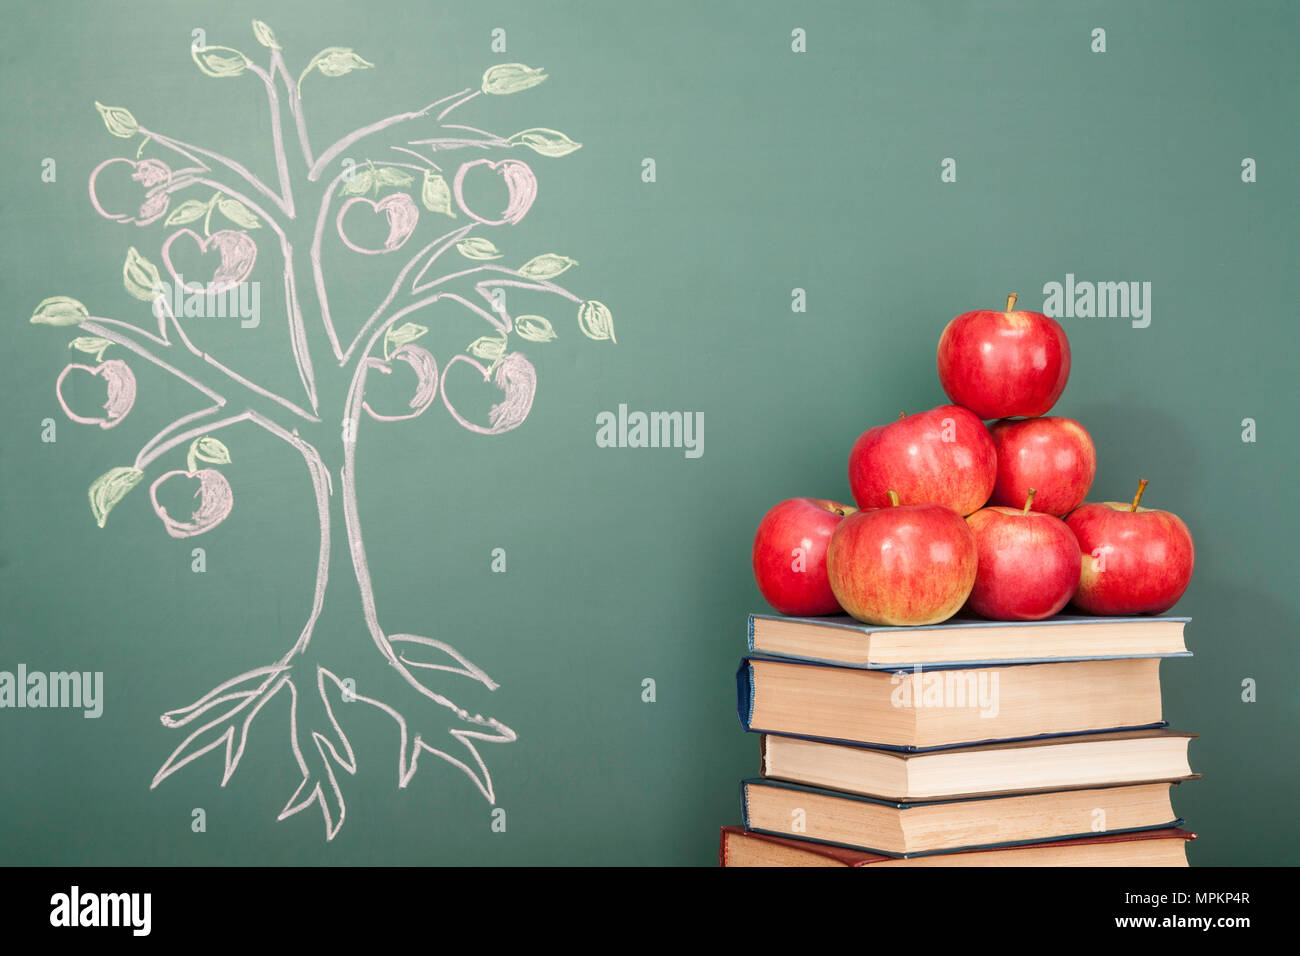 Education concept with apples and illustration of Apple tree on blackboard Stock Photo